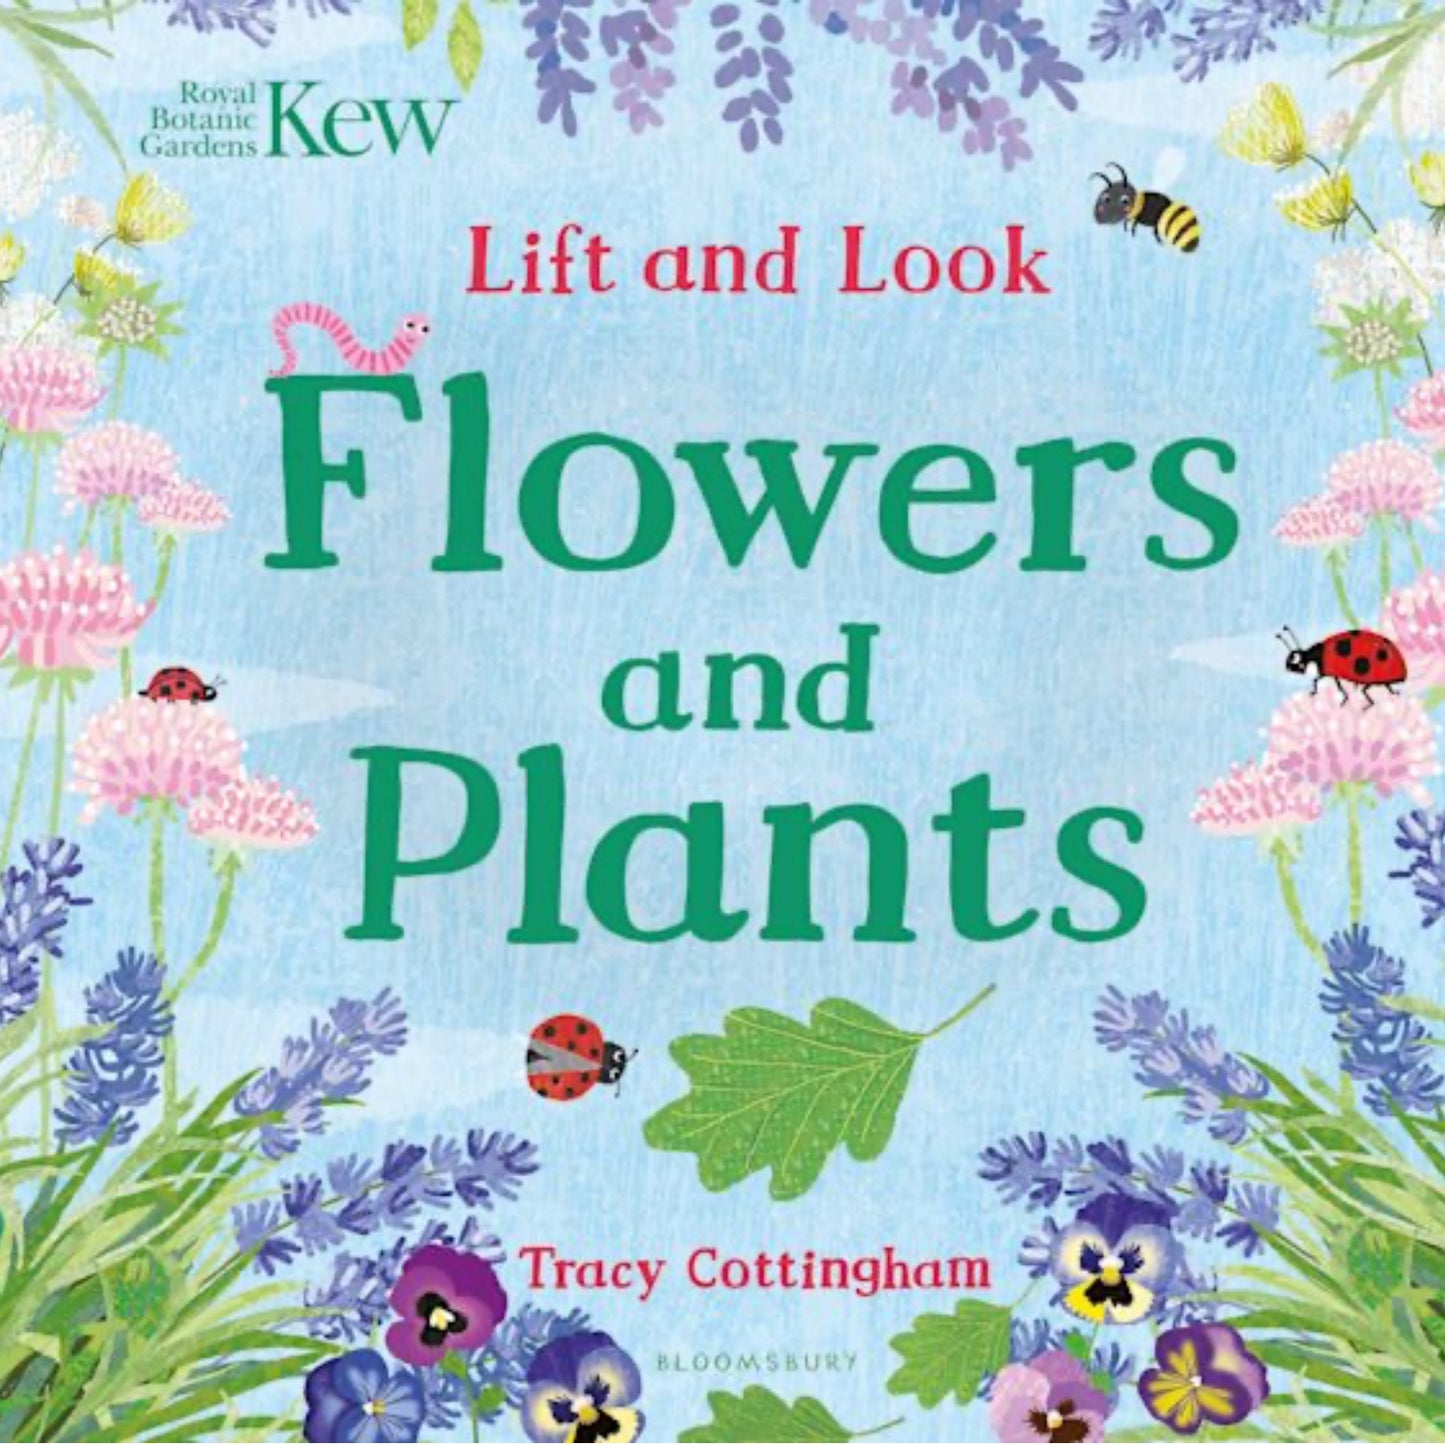 Lift and Look Flowers and Plants - Kew | Children's Board Book on Nature